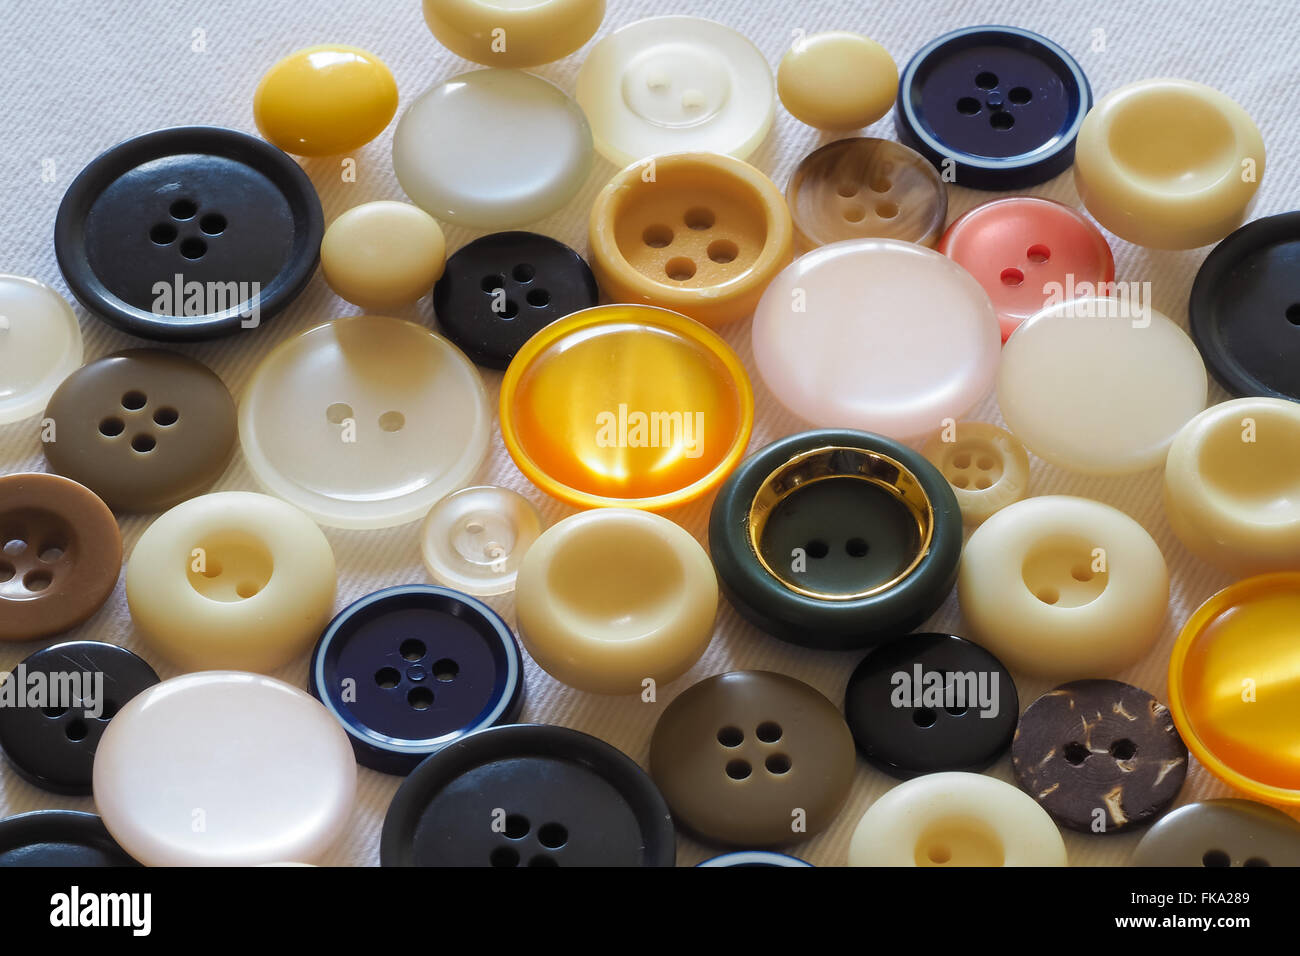 Buttons Different Colors Stock Photo